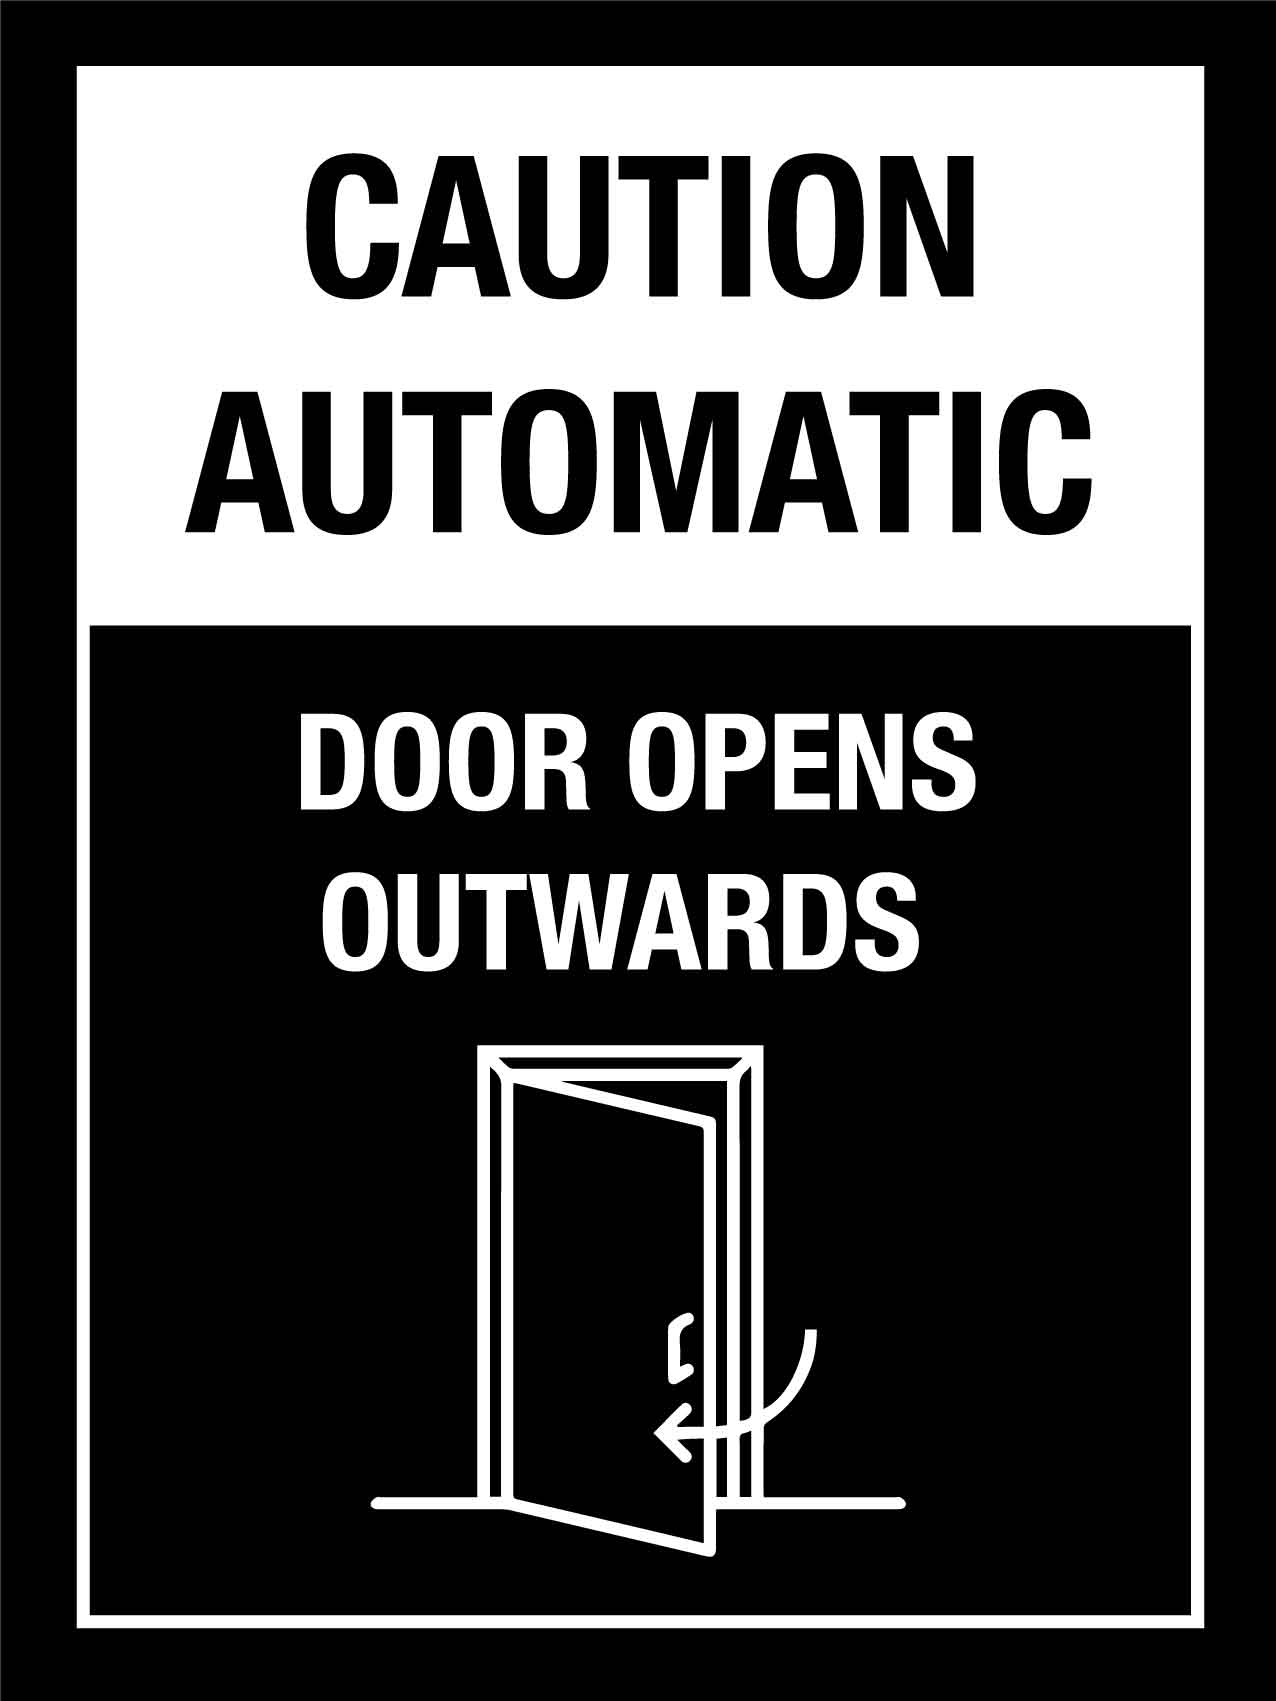 Caution Automatic Door Opens Outwards Sign